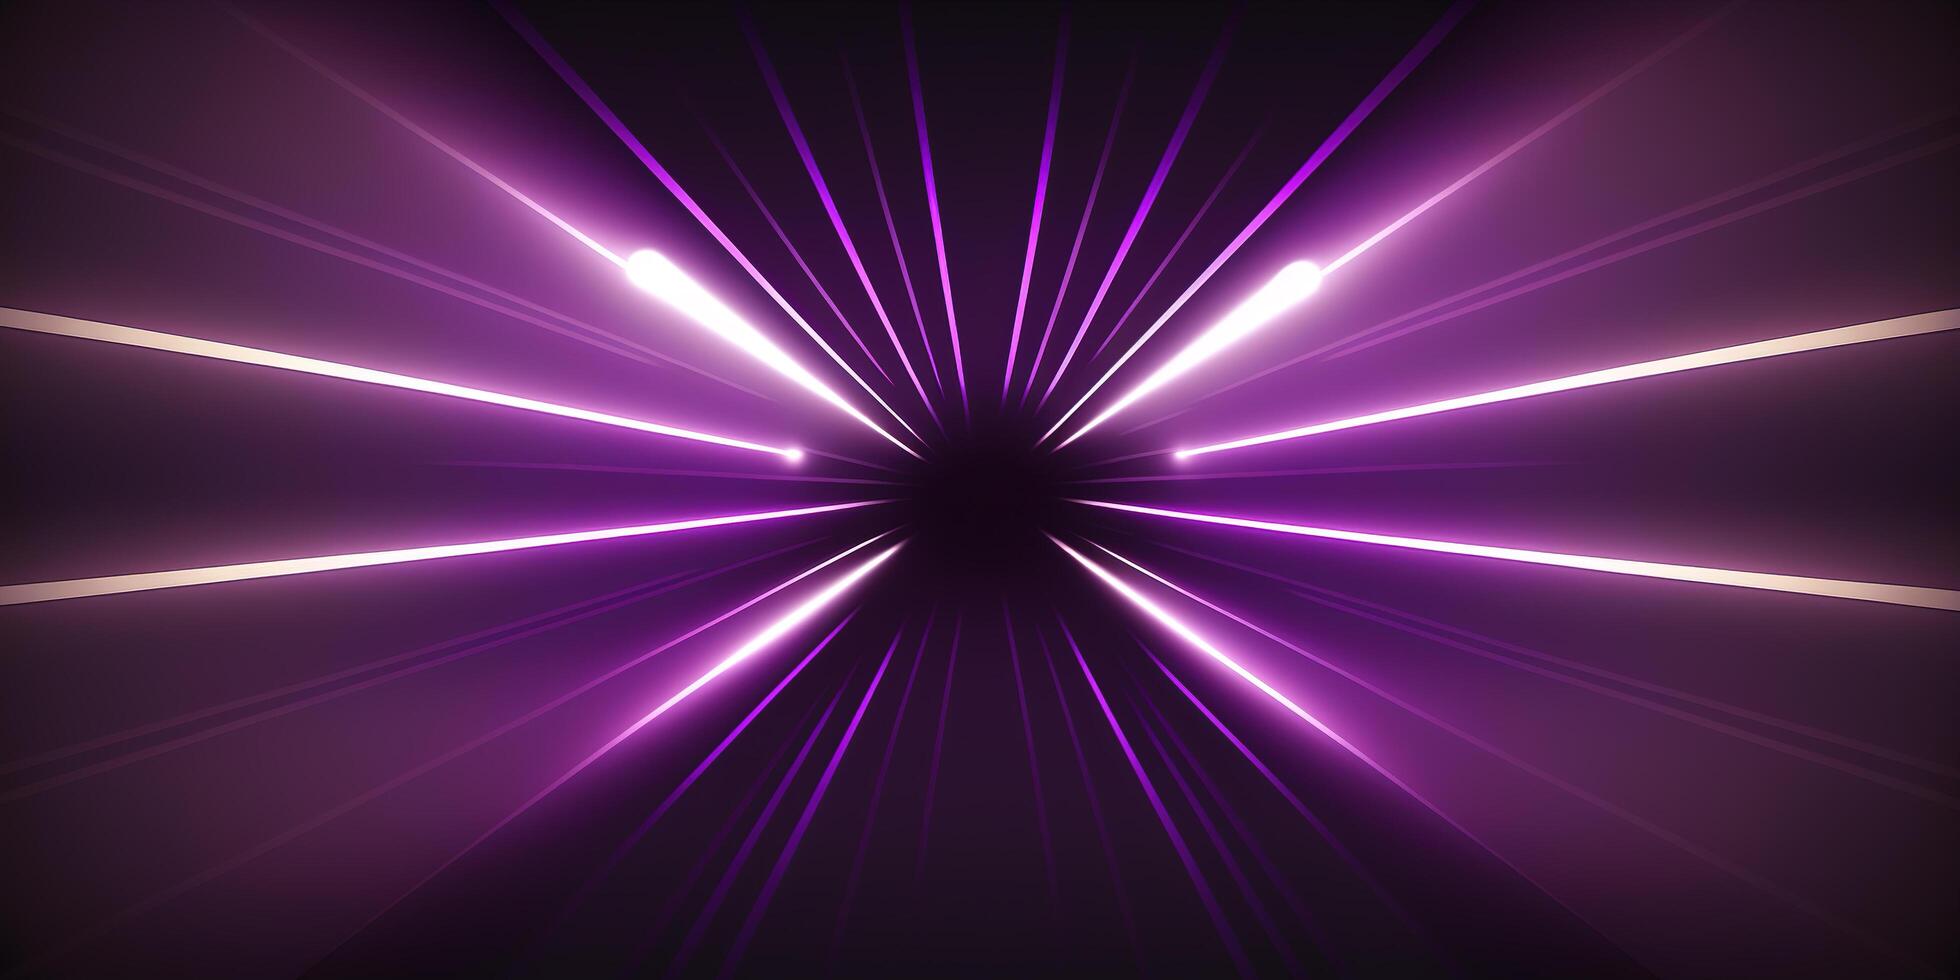 symmetrical purple tech neon light abstract background with lines and shapes. photo